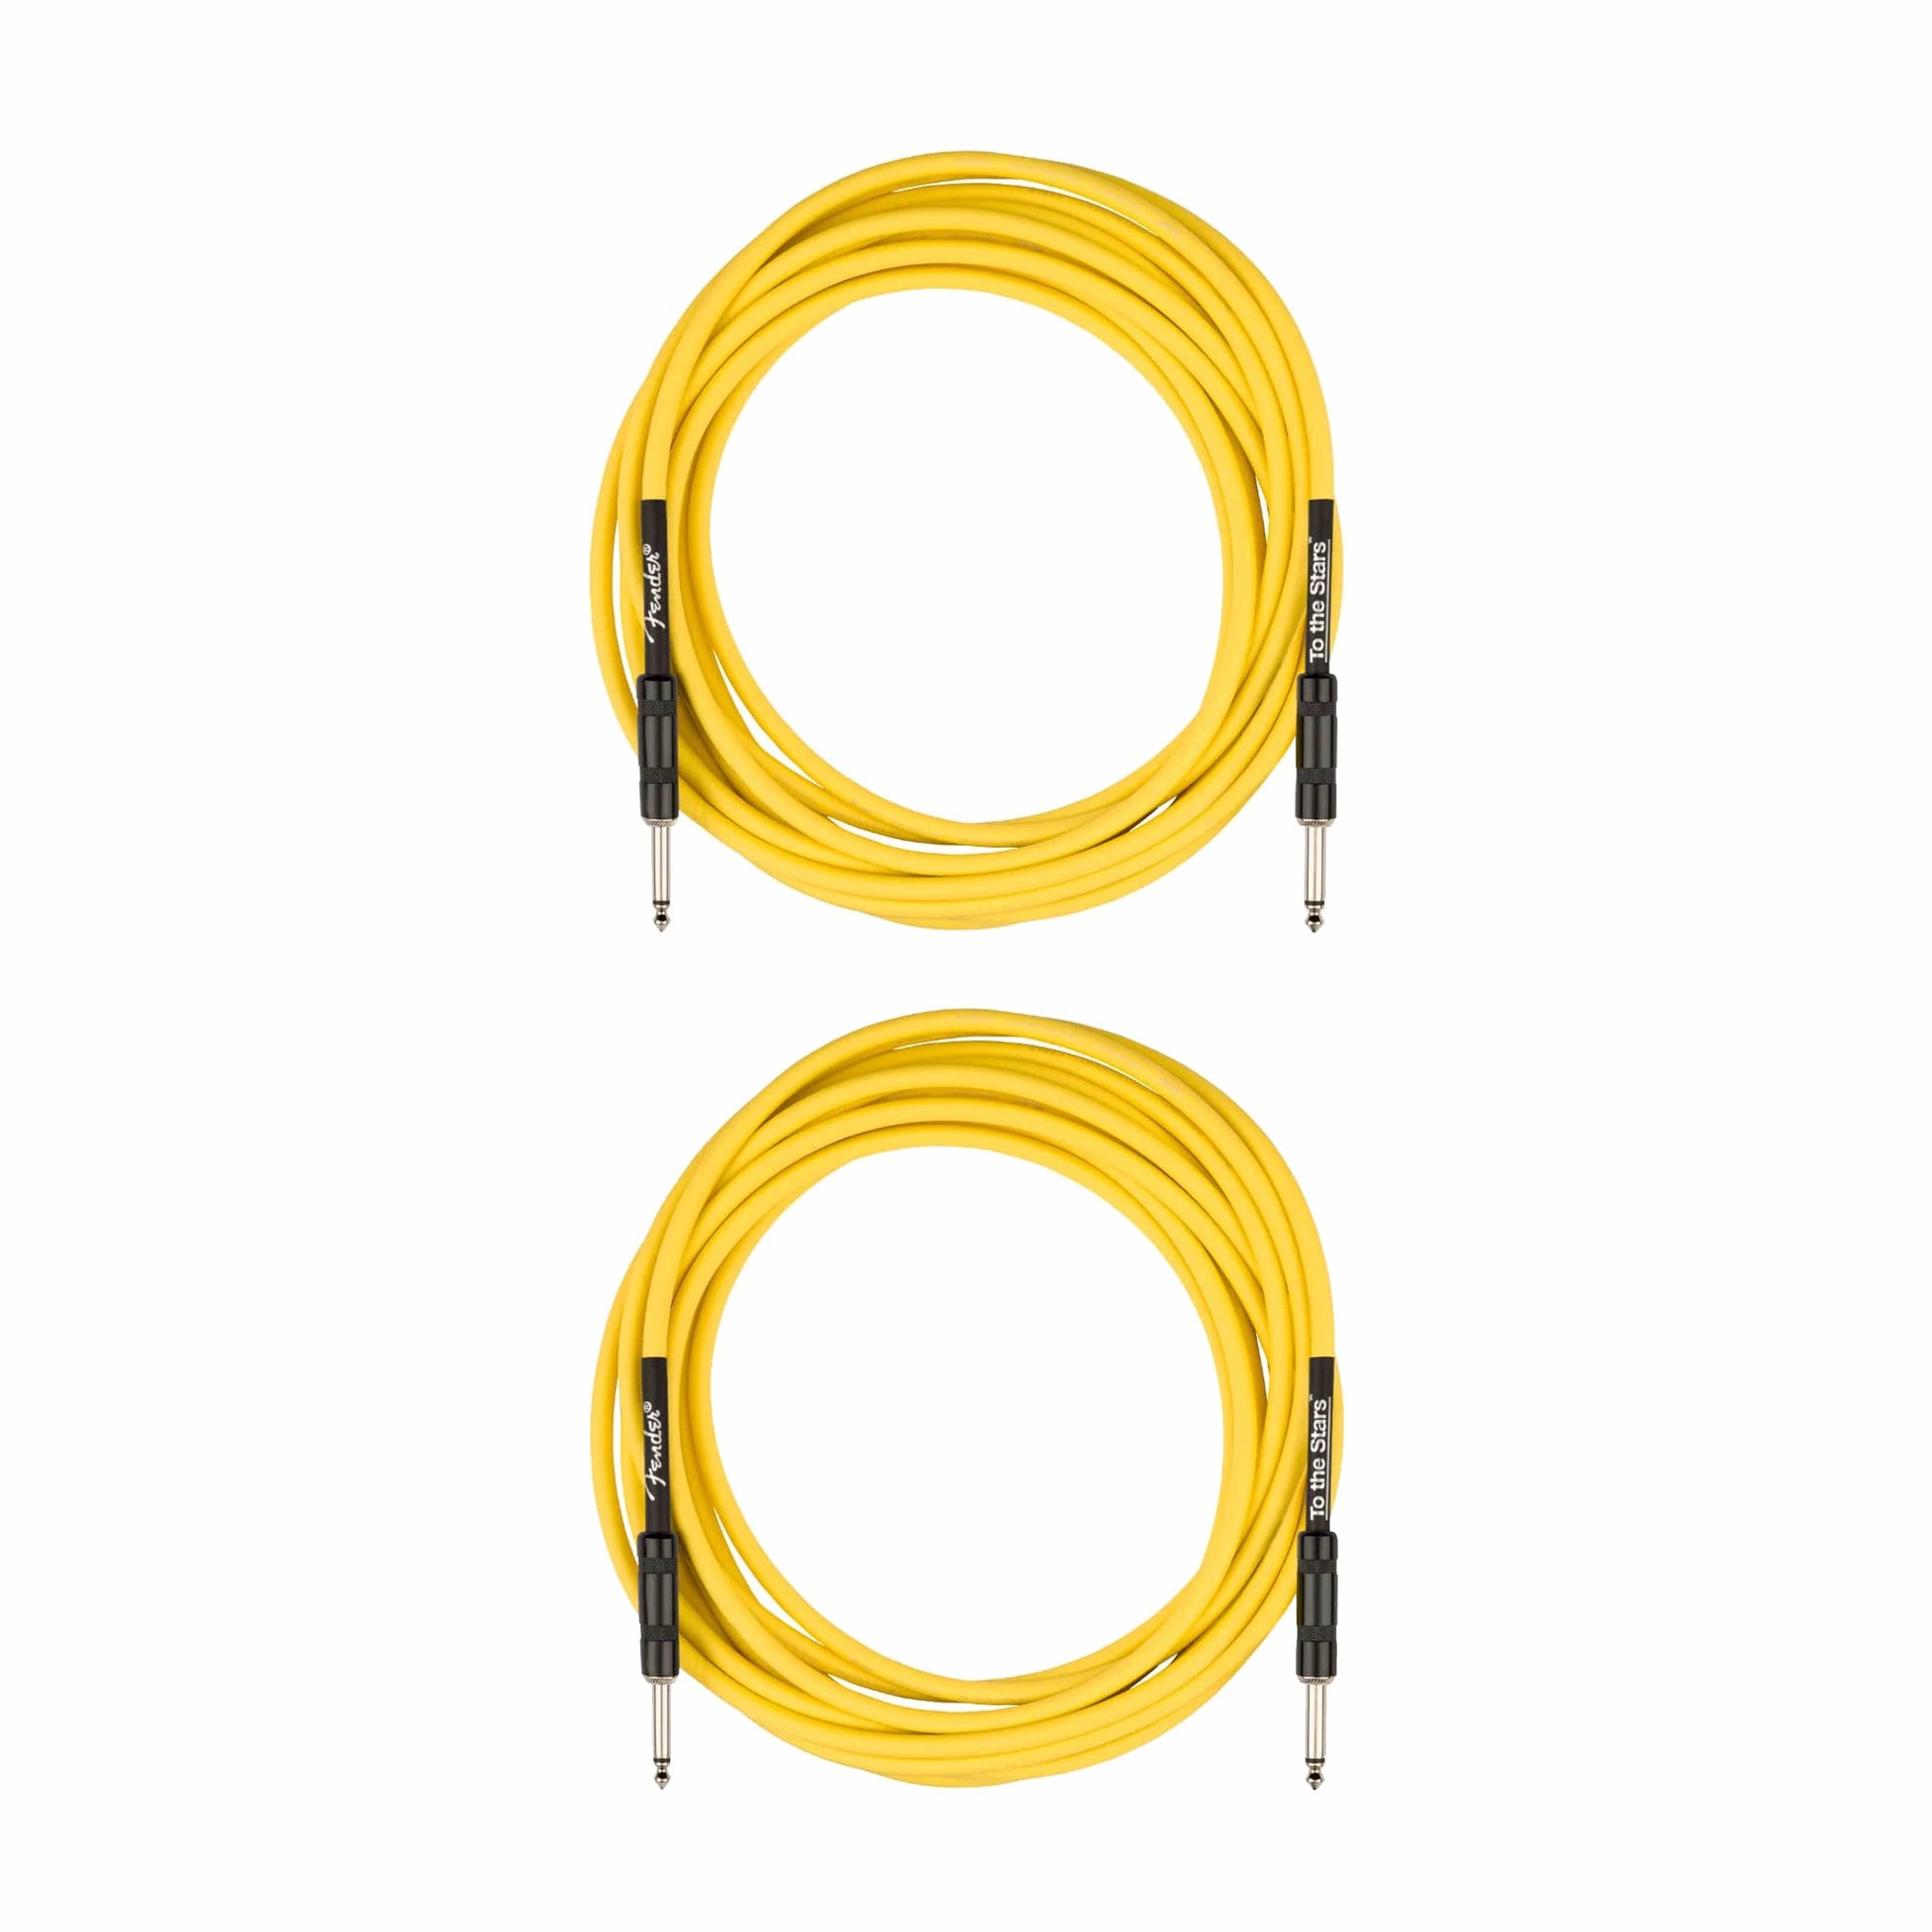 Fender Tom DeLonge 10' To The Stars Instrument Cable Graffiti Yellow 2-Pack Bundle Accessories / Cables